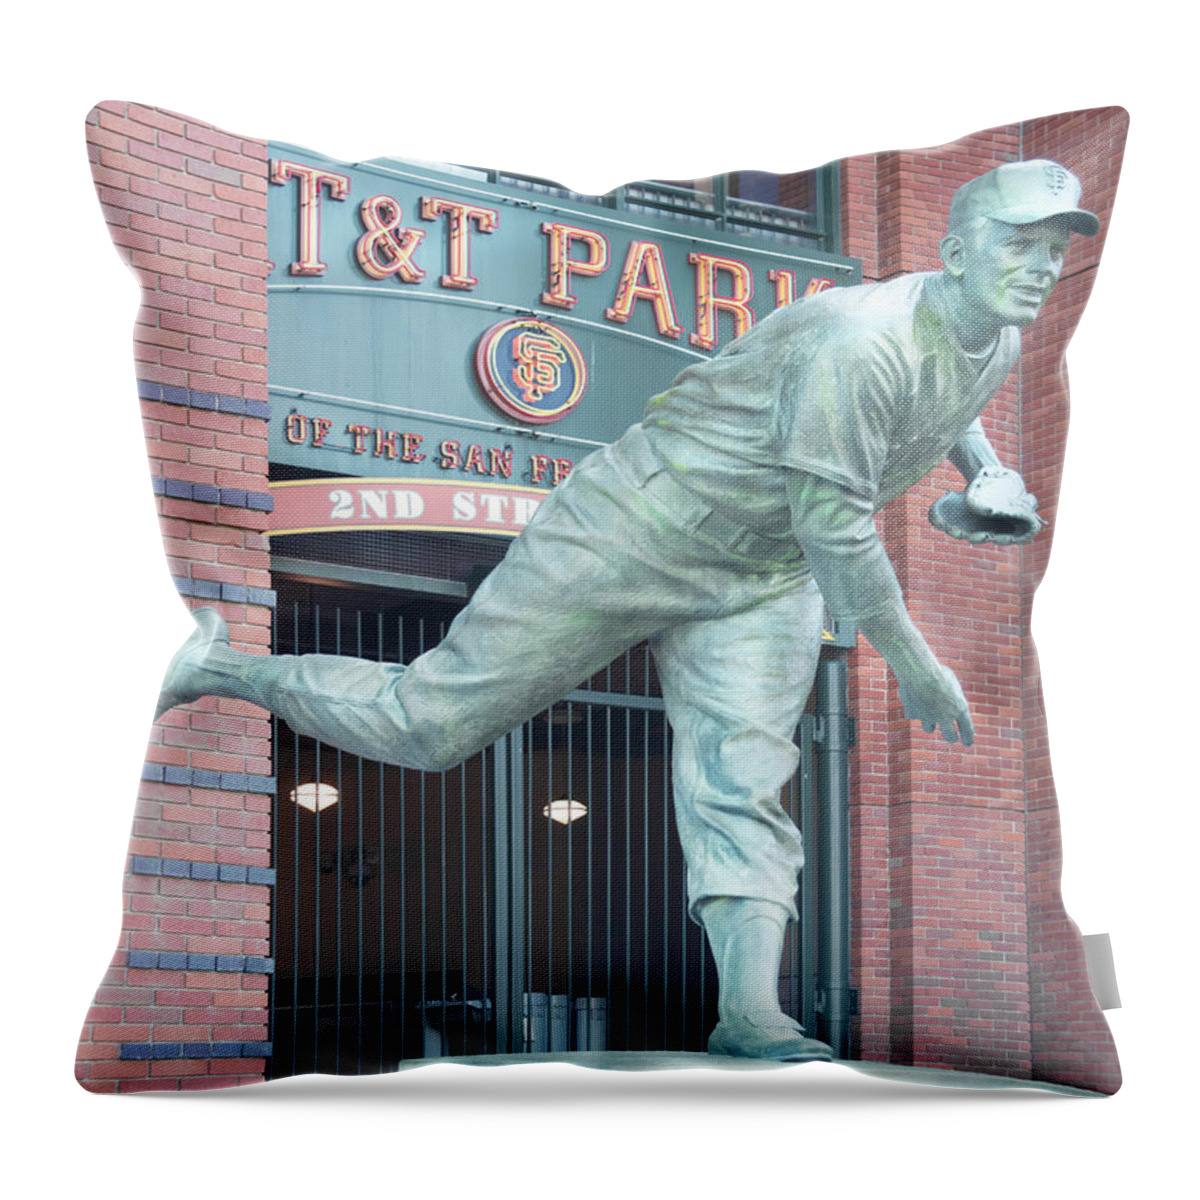 Gaylord Perry Throw Pillow featuring the photograph Gaylord Perry by Jessica Levant